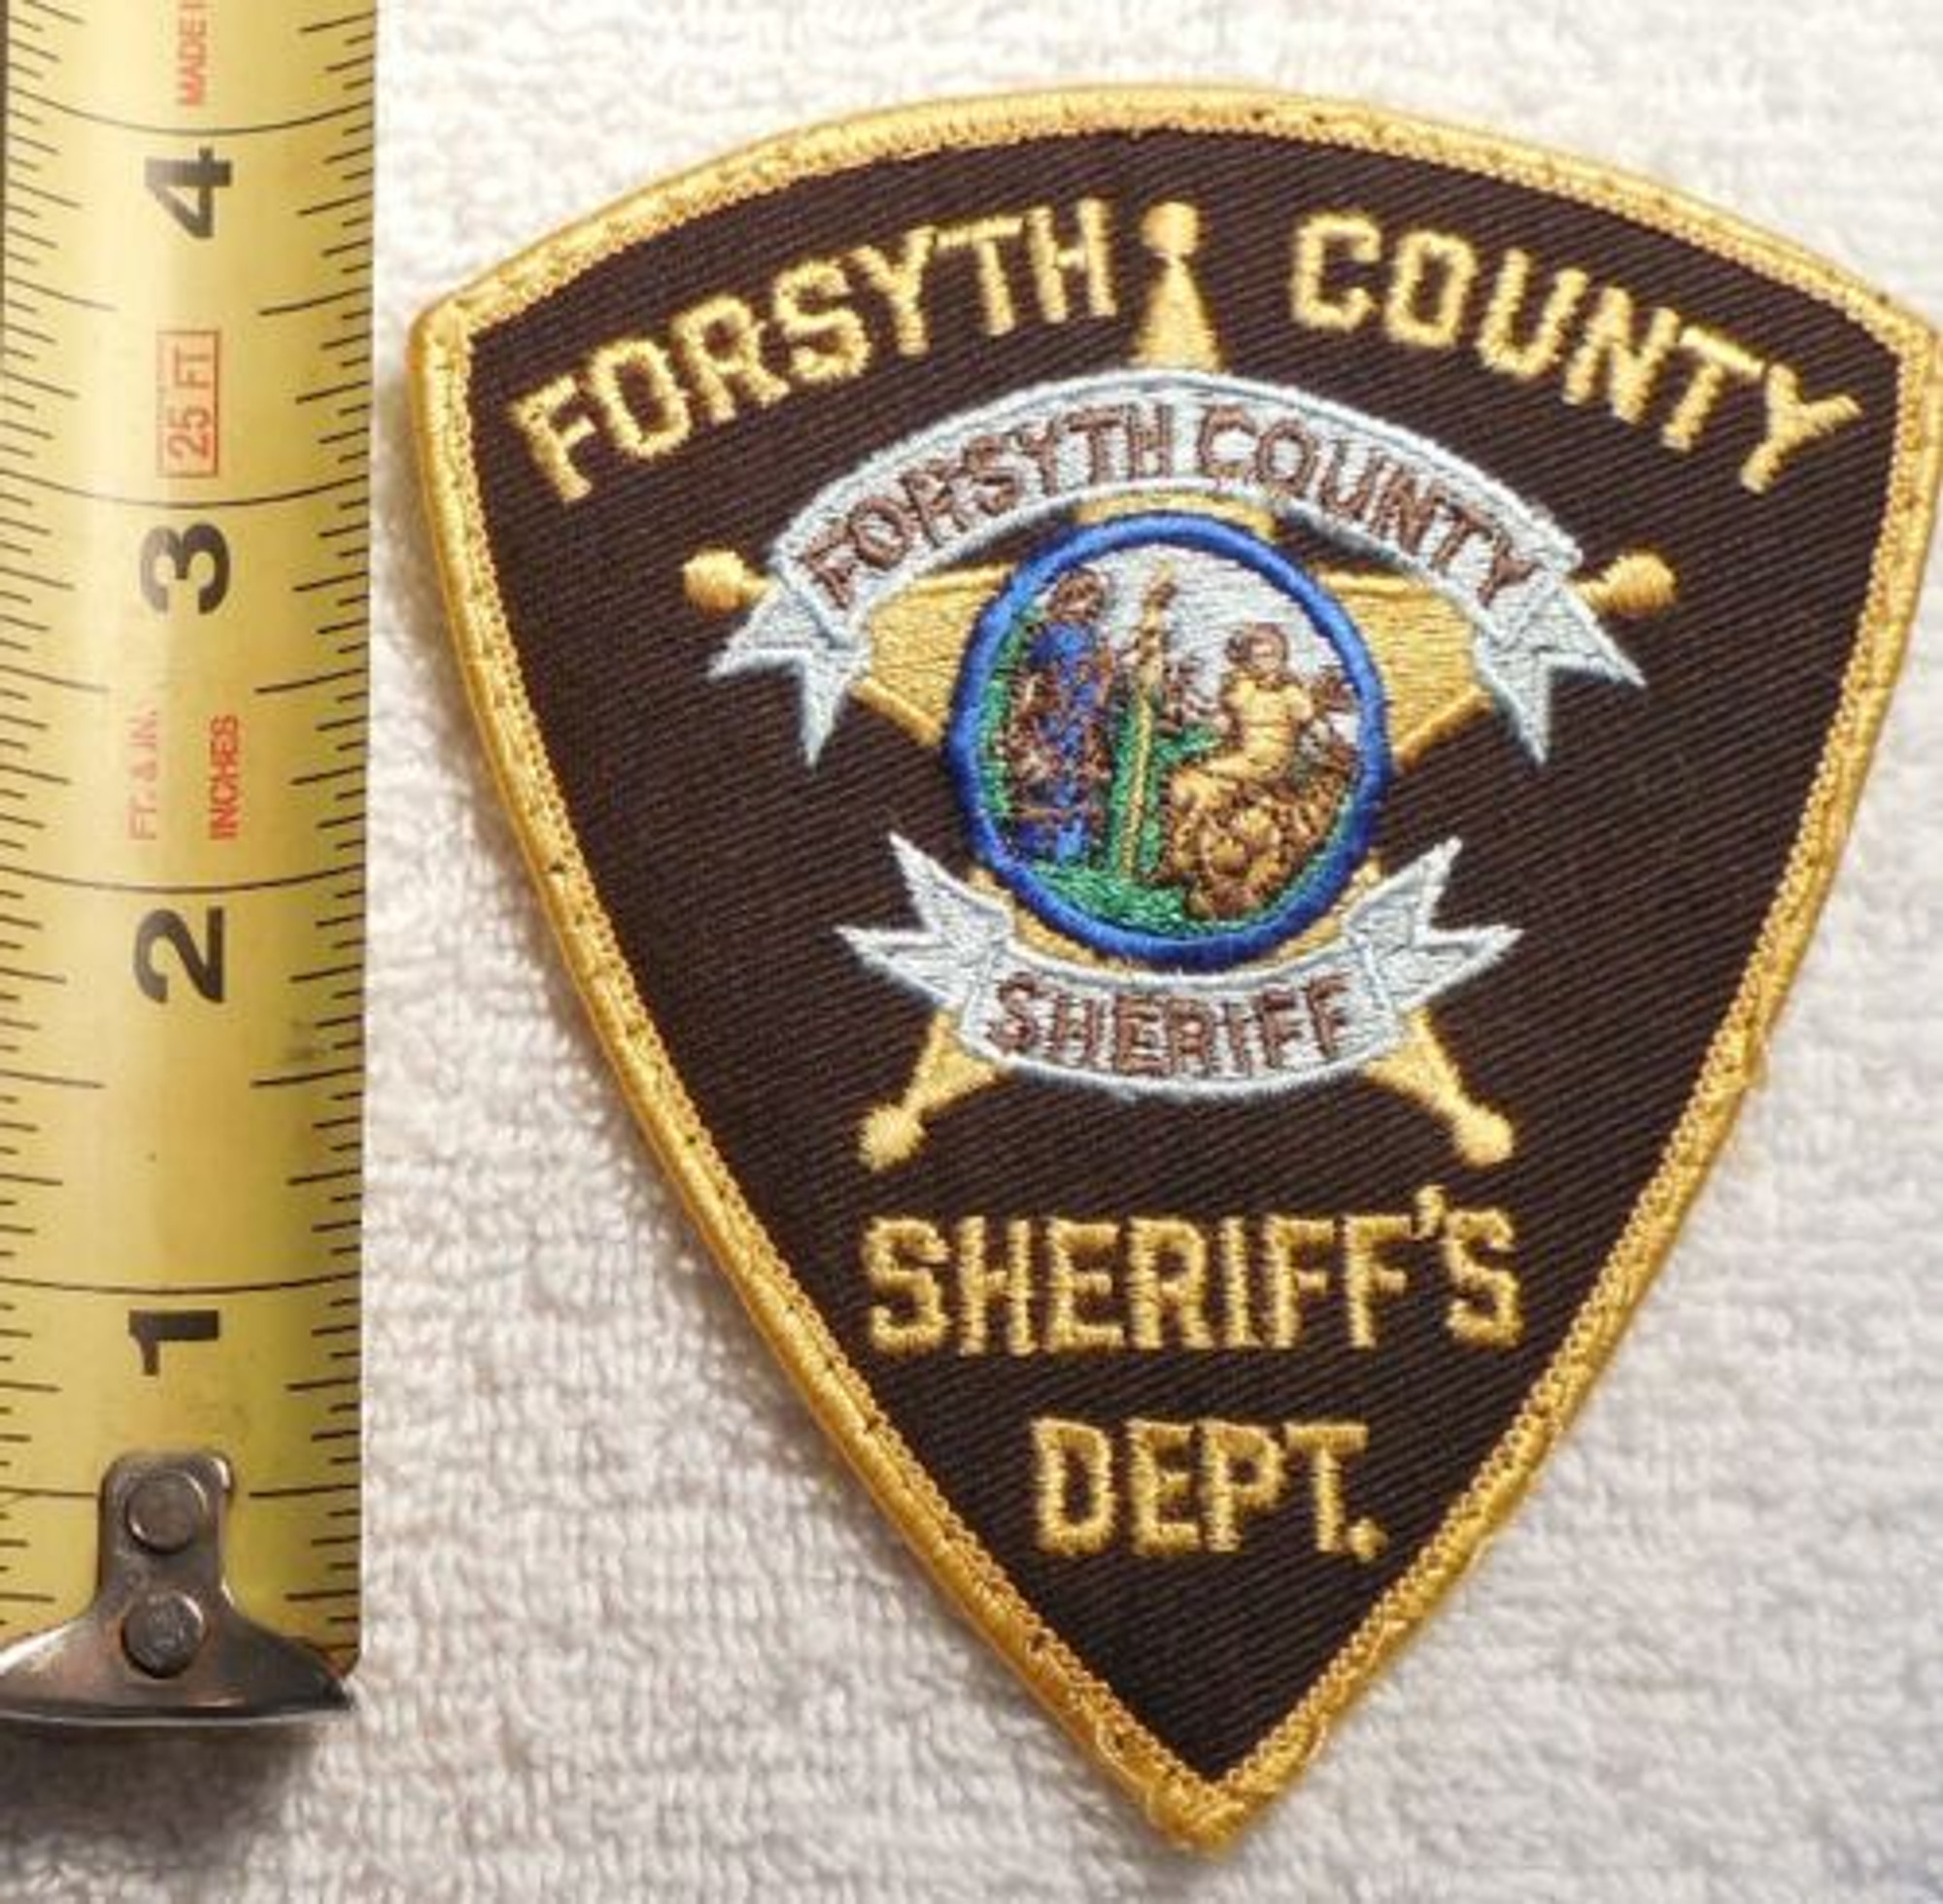 Forsyth County NC Police Patch